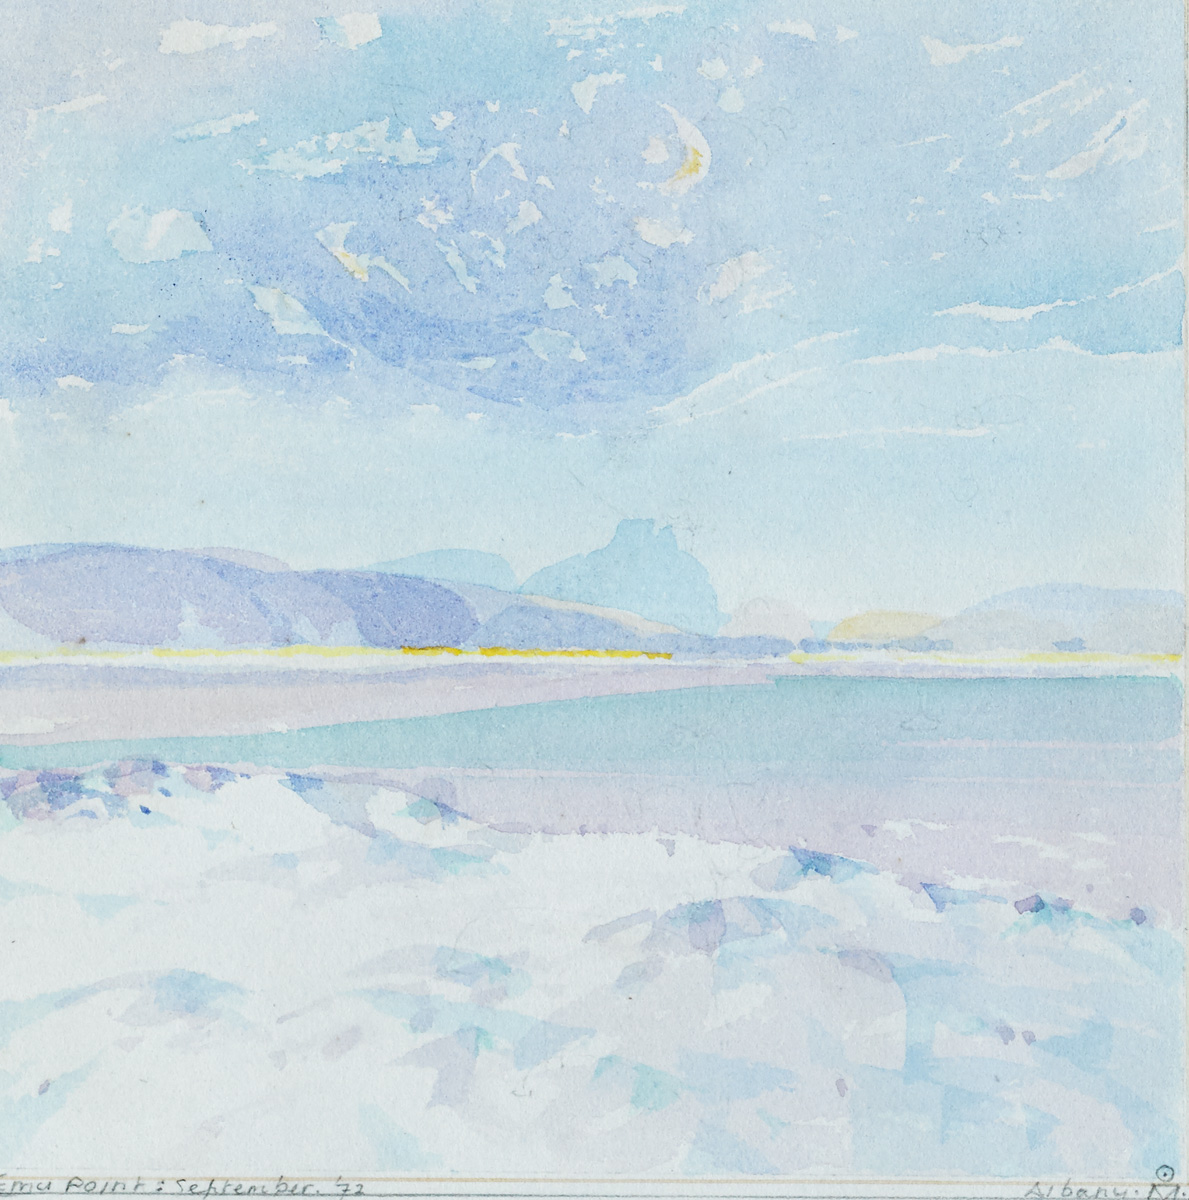 EMU POINT [AUSTRALIA], 1972 by Colin Middleton sold for 750 at Whyte's Auctions